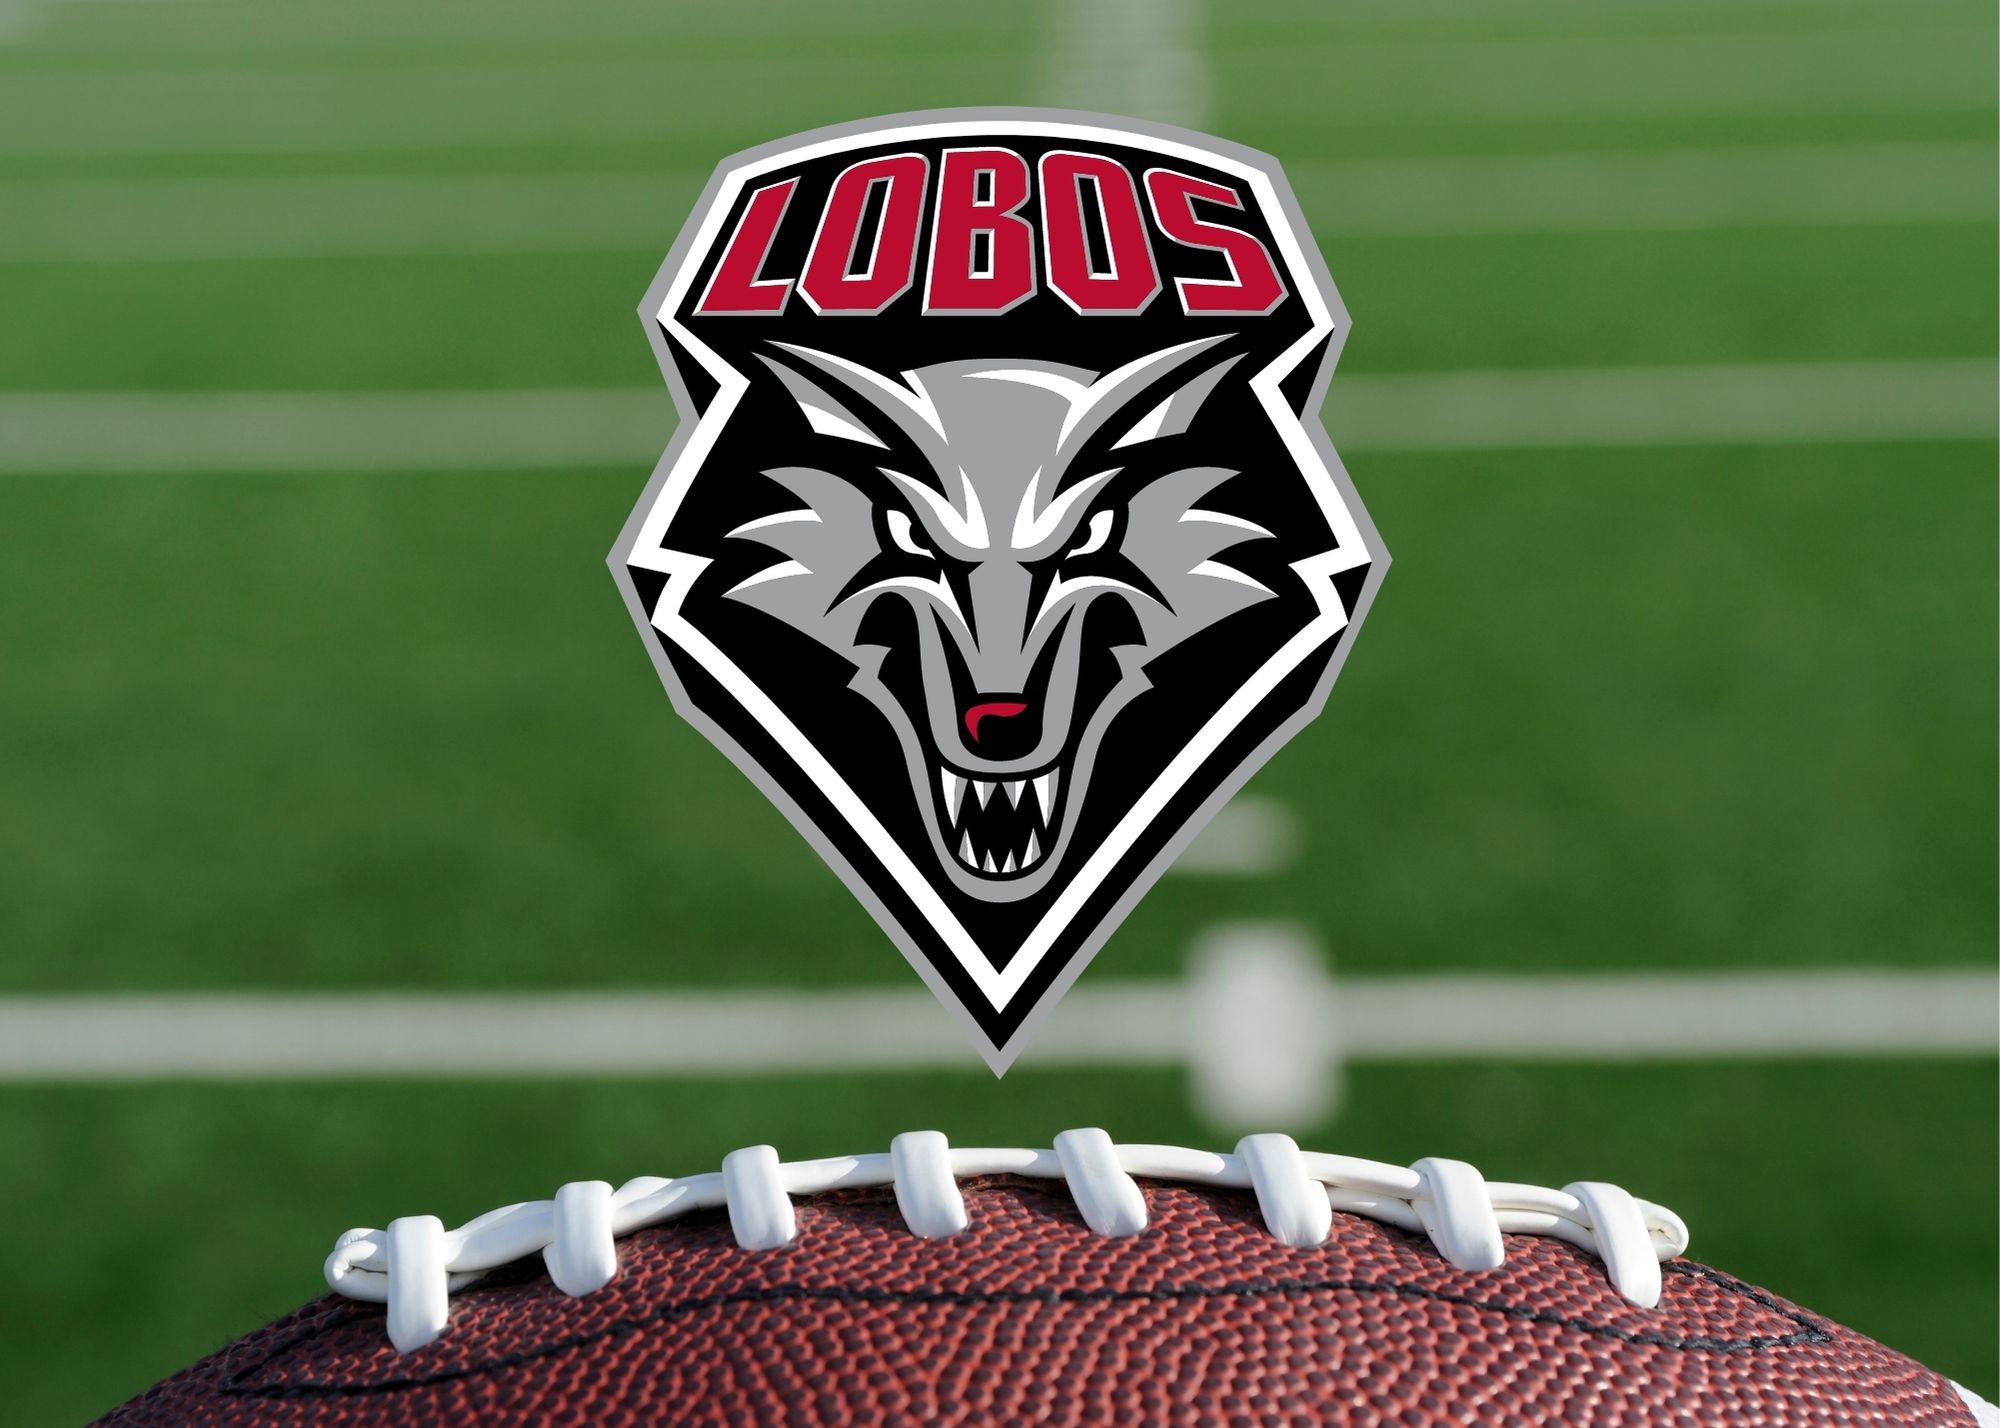 Disappointing 3-9 season comes to a close as Lobos fall to Utah State 35-10